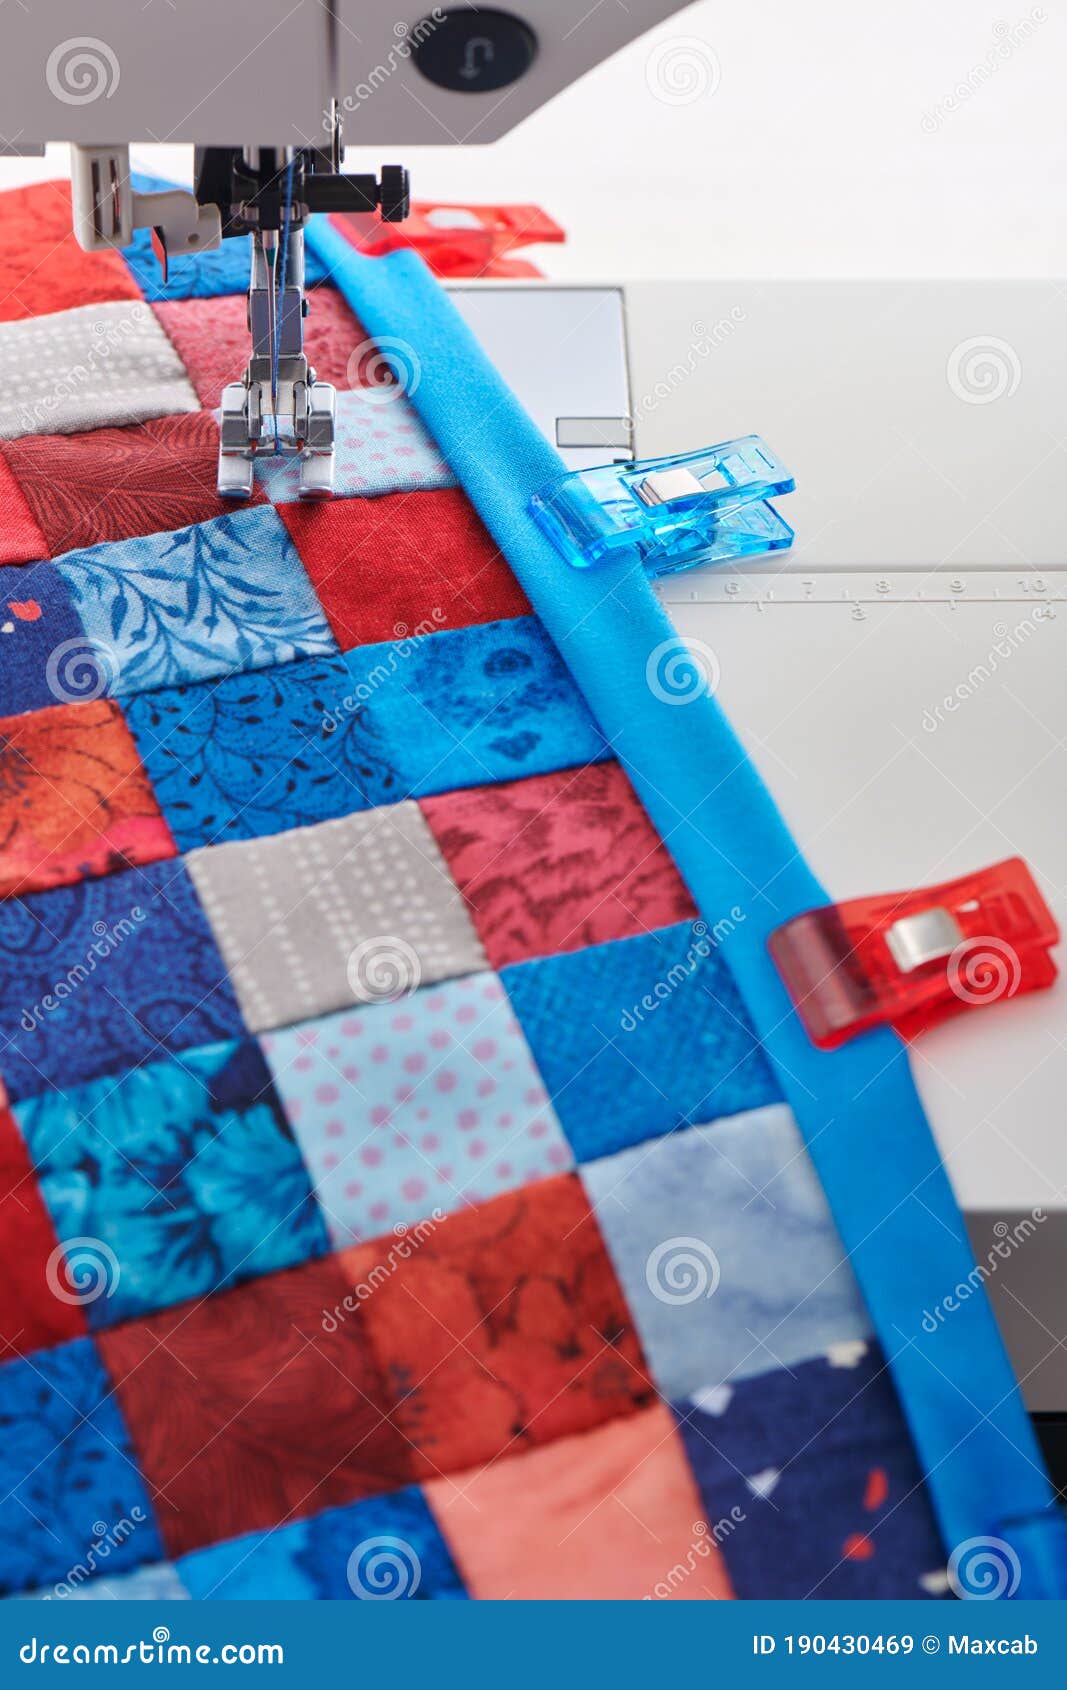 Making of Quilt Binding by Dint of Sewing Quilting Clips by Using Sewing  Machine Stock Image - Image of binding, accessories: 190430469